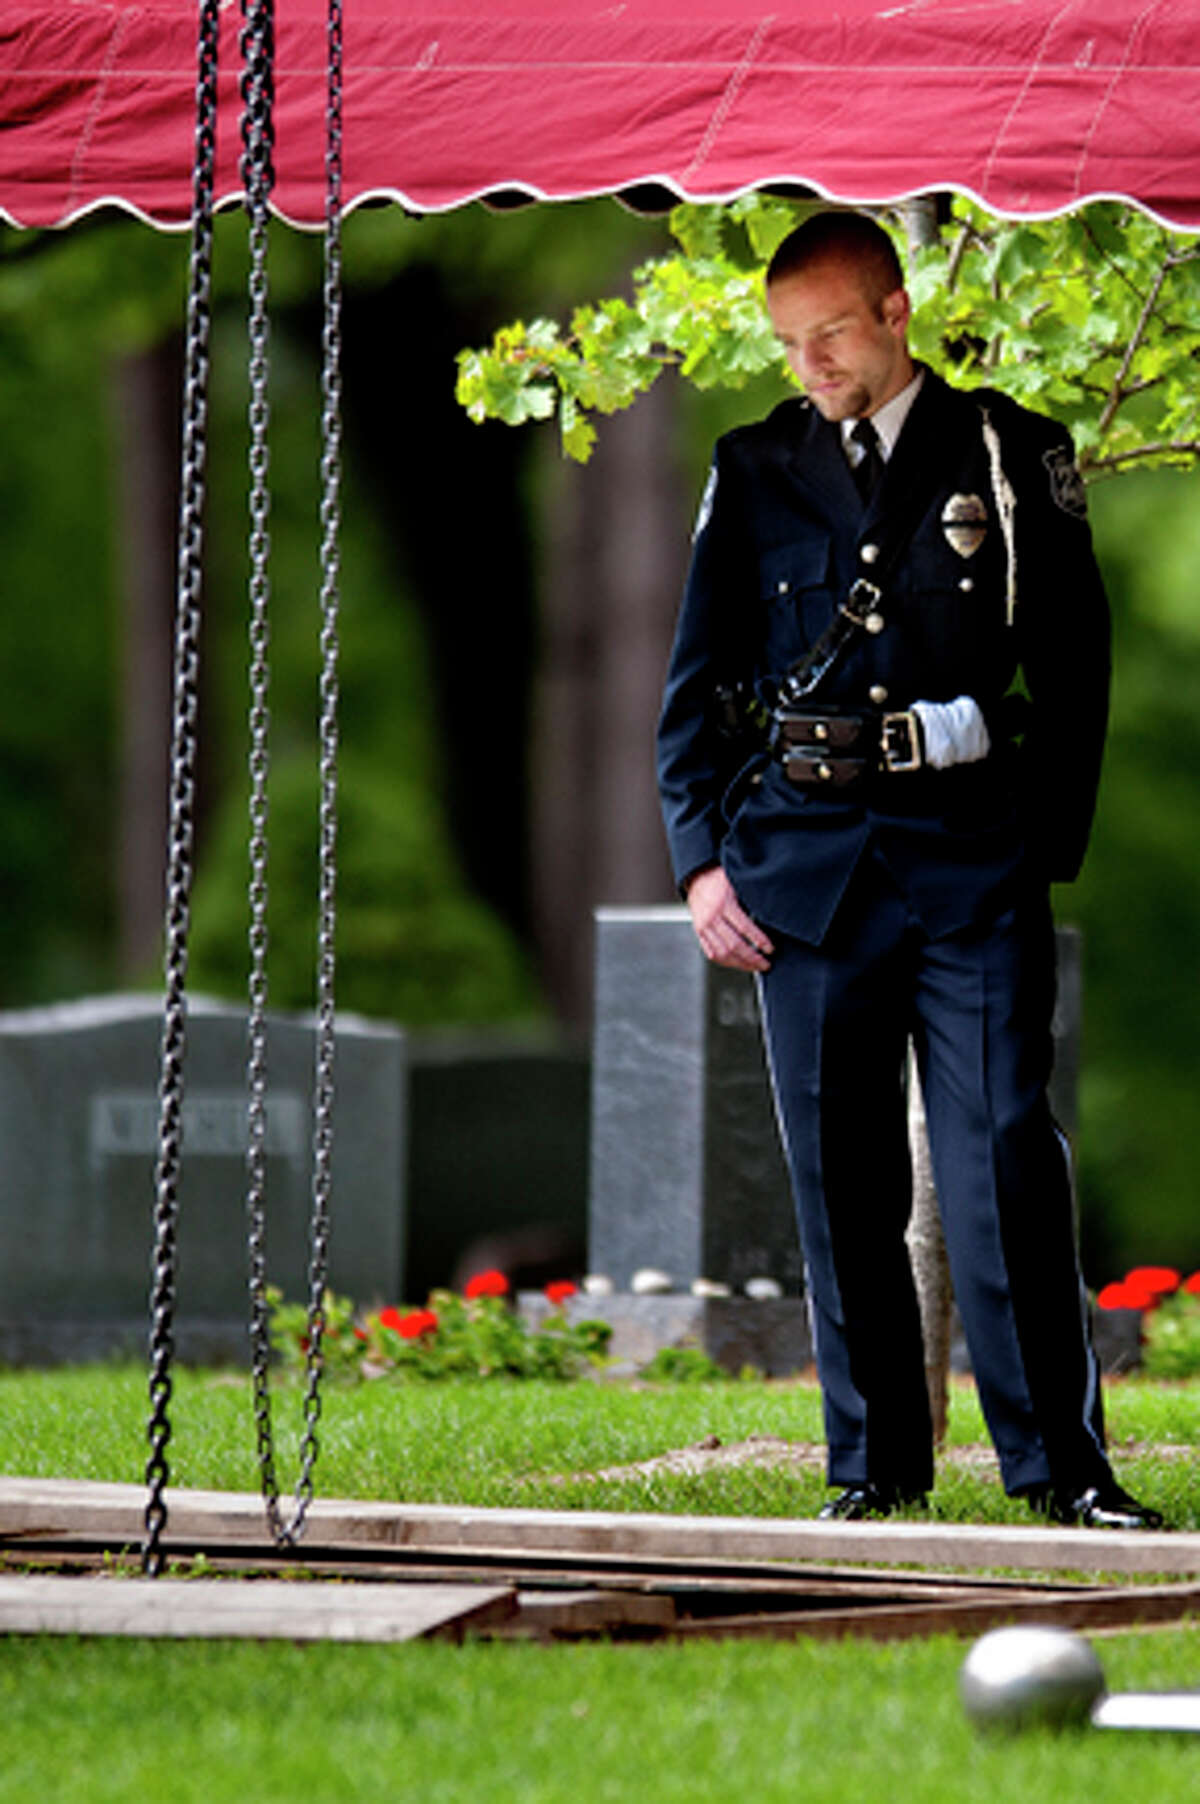 Rapid City Police Officer Cade Bloomenrader looks on as the lid of the burial vault is put in place after the funeral of Rapid City Police Officer J. Ryan McCandless, Thursday, Aug. 11, 2011, at the Midland Cemetery in Midland Mich. Bloomenrader was a good friend of McCandless, who was killed in the line of duty last week in South Dakota. McCandless, a 2001 H.H. Dow High graduate, is the son of retired Midland County Undersheriff James McCandless.